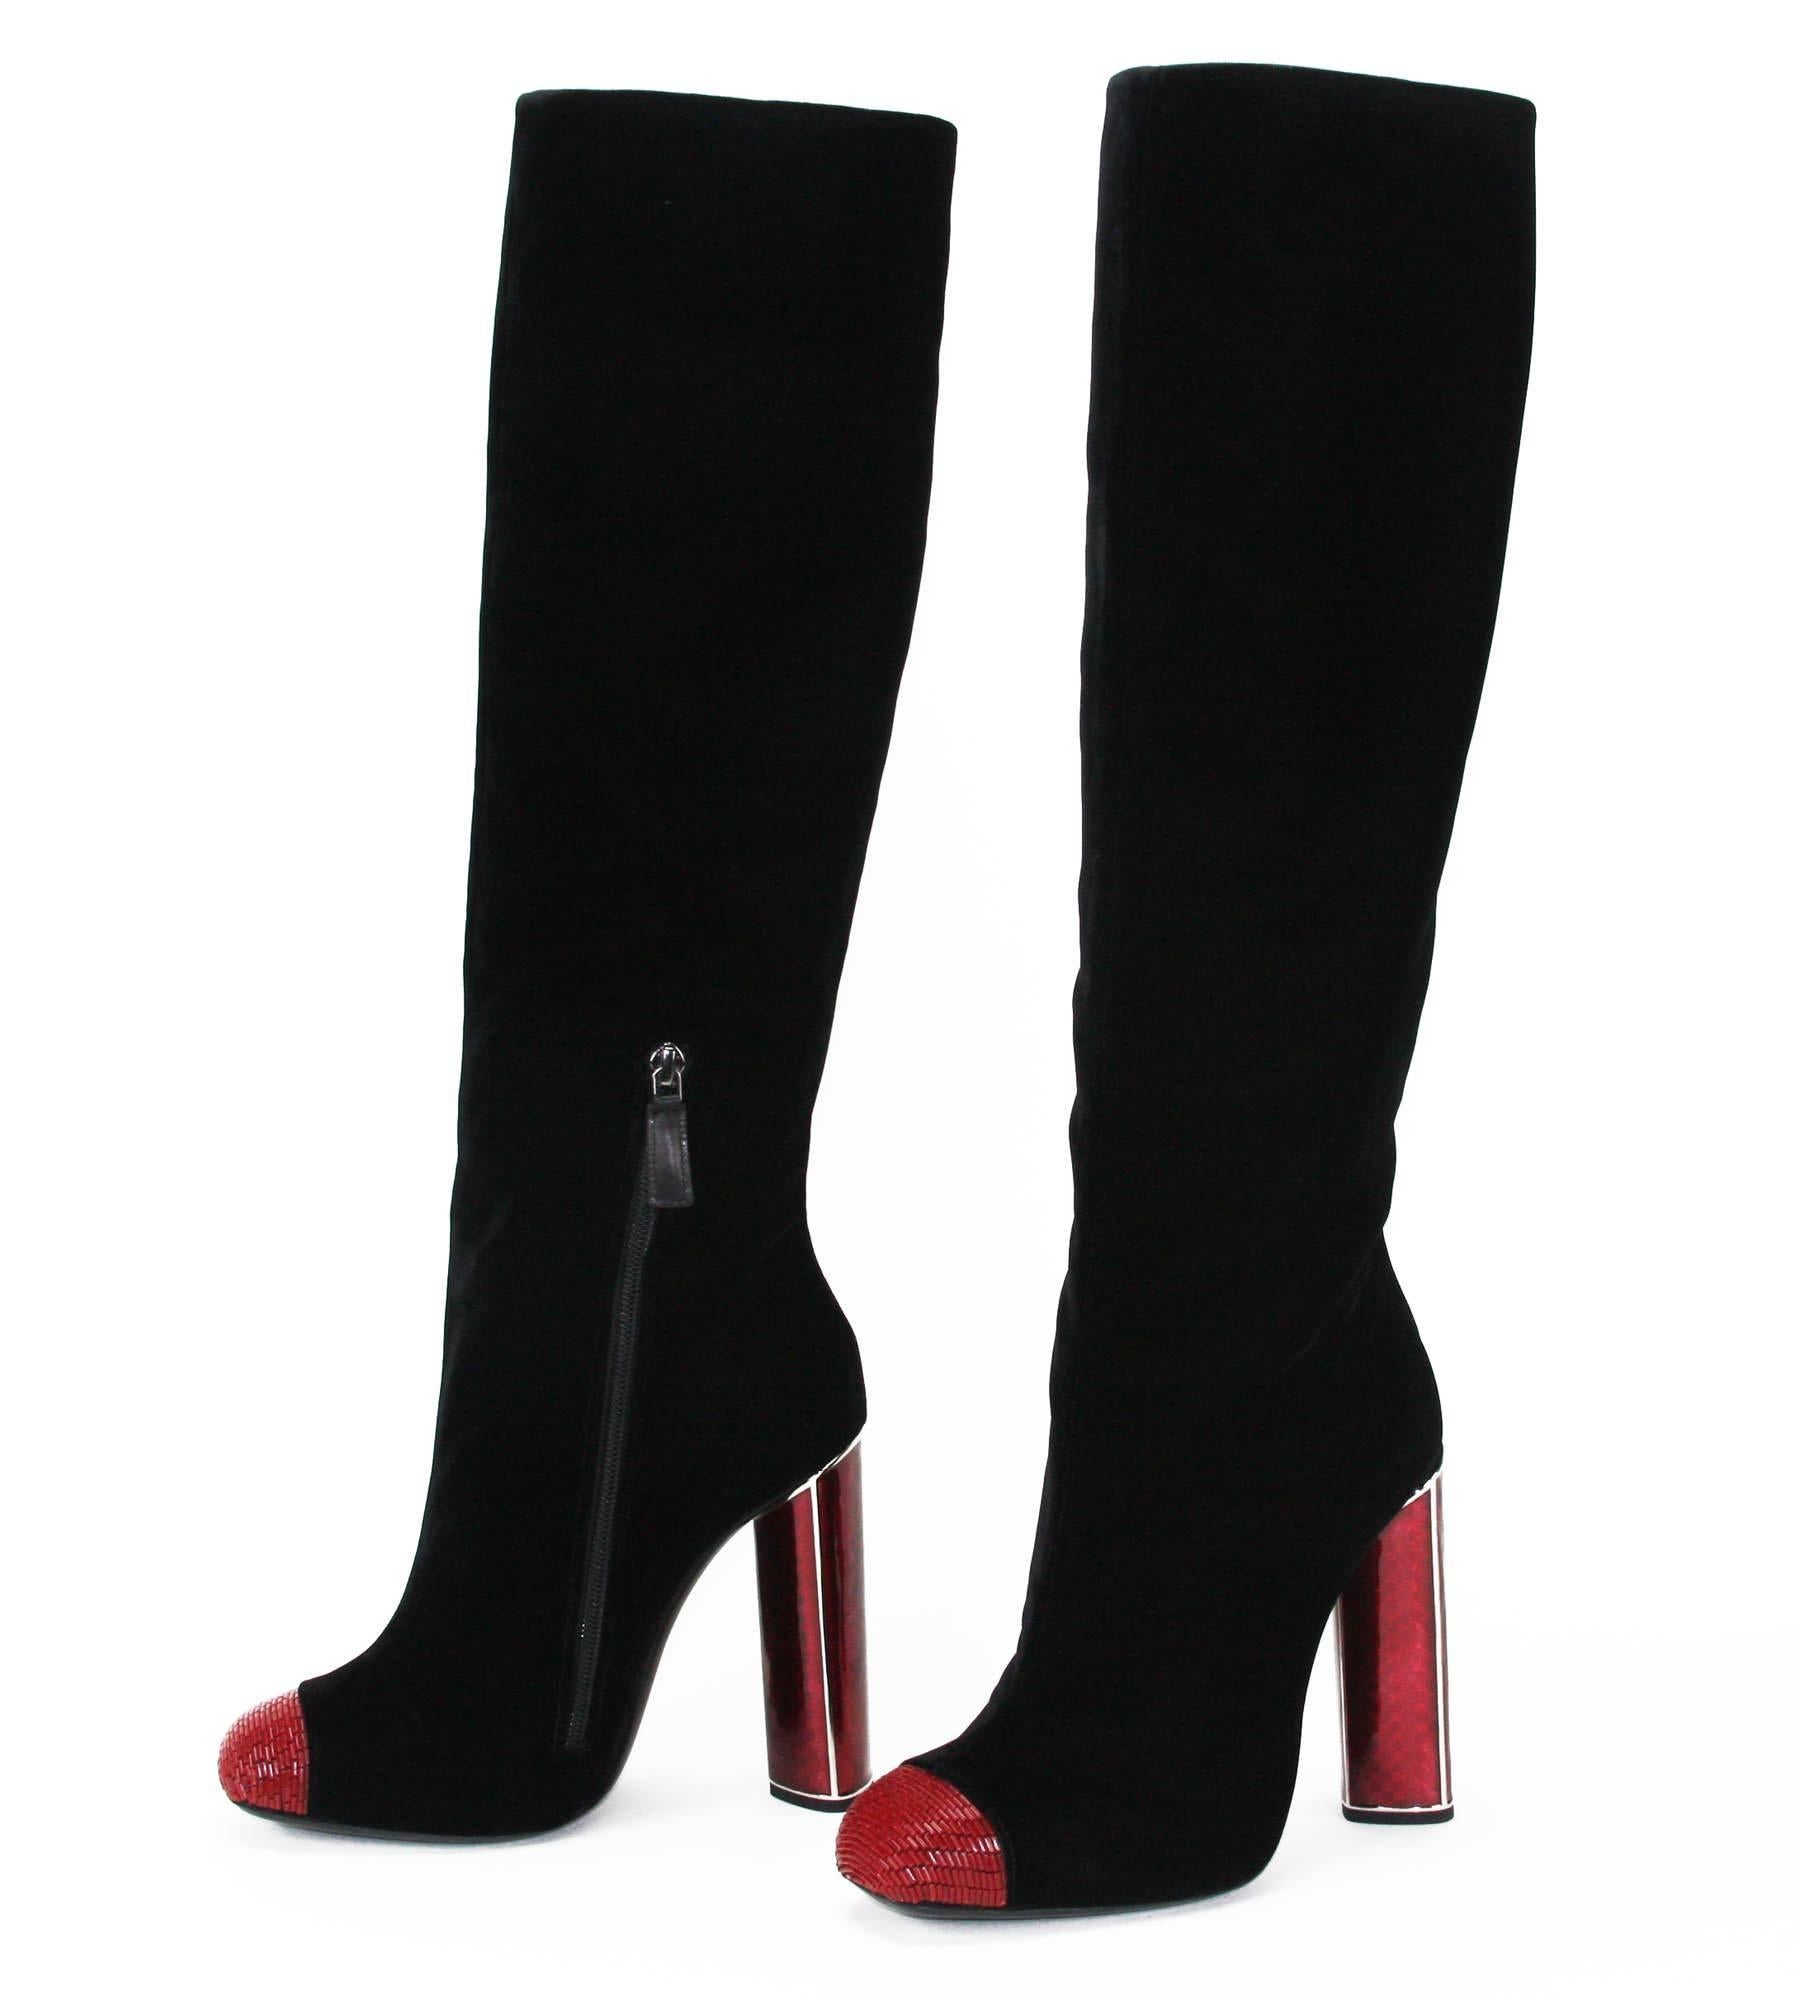 Luxury, glamour and sophistication are bywords for world-renowned designer TOM FORD.
Designer size -  38 ( US 8)
Midnight Black velvet, Ruby Red Bead Embellished Square Toe, Silver-trimmed Heel 4.25 inches, Partial Zipper Along Side.
Made in